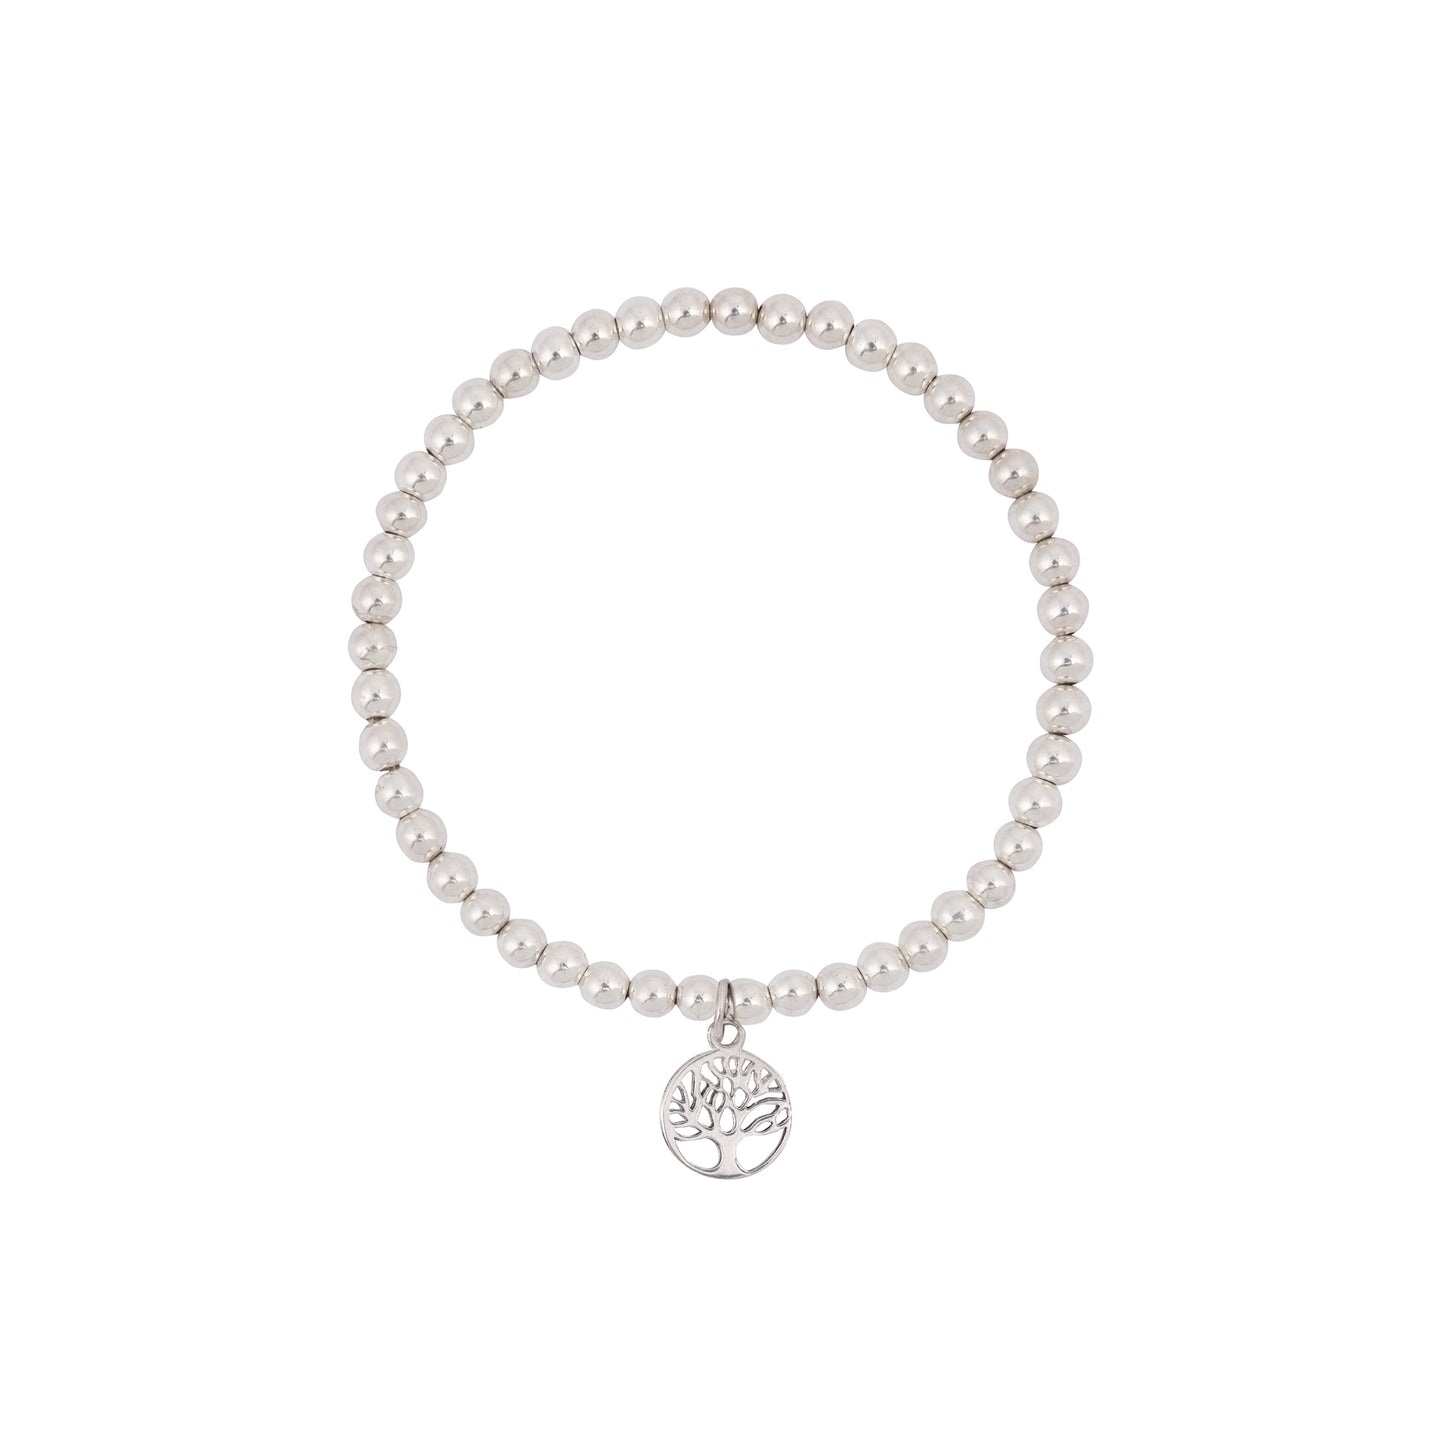 A sterling silver bracelet featuring evenly spaced round beads. A small pendant with a tree of life design hangs from the bracelet, centered among the beads. Ideal for those who appreciate the Tree of Life Silver Bracelet by Made Here with Love, it is set against a plain white background.